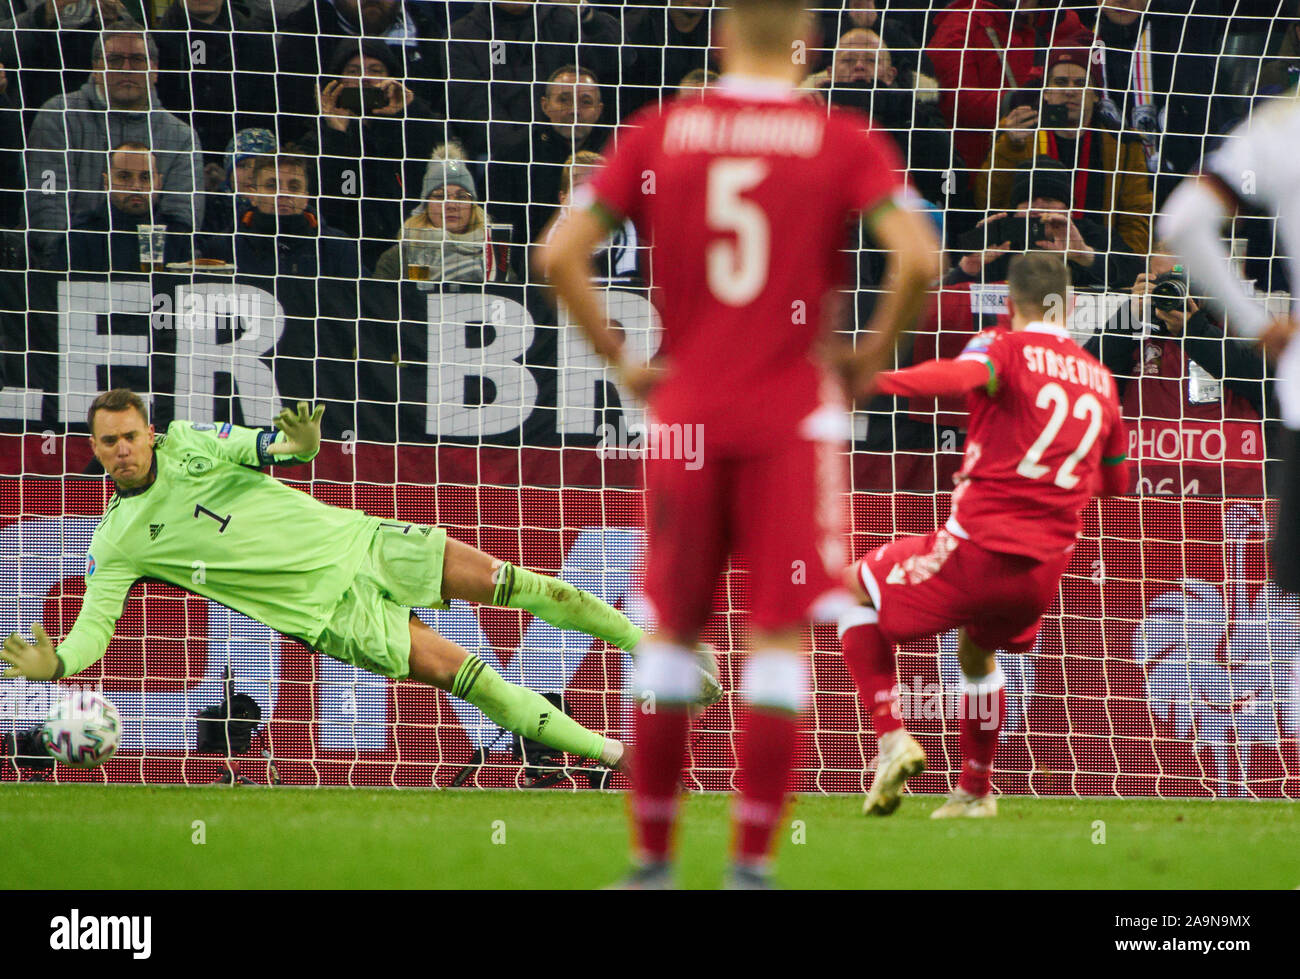 Mönchengladbach, Germany. 16th Nov 2019. Manuel NEUER, DFB 1 goalkeeper, fights for the ball, catches, catch, hold, defend, action, frame, cut out, reaction, fist, save, Penalty shoot-out, 11m, penalty kick, action, single shot, shot on goal, GERMANY - BELARUS Important: DFB regulations prohibit any use of photographs as image sequences and/or quasi-video. Qualification for European Championships, EM Quali, 2020 Season 2019/2020, November 16, 2019 in Mönchengladbach, Germany. Credit: Peter Schatz/Alamy Live News Stock Photo